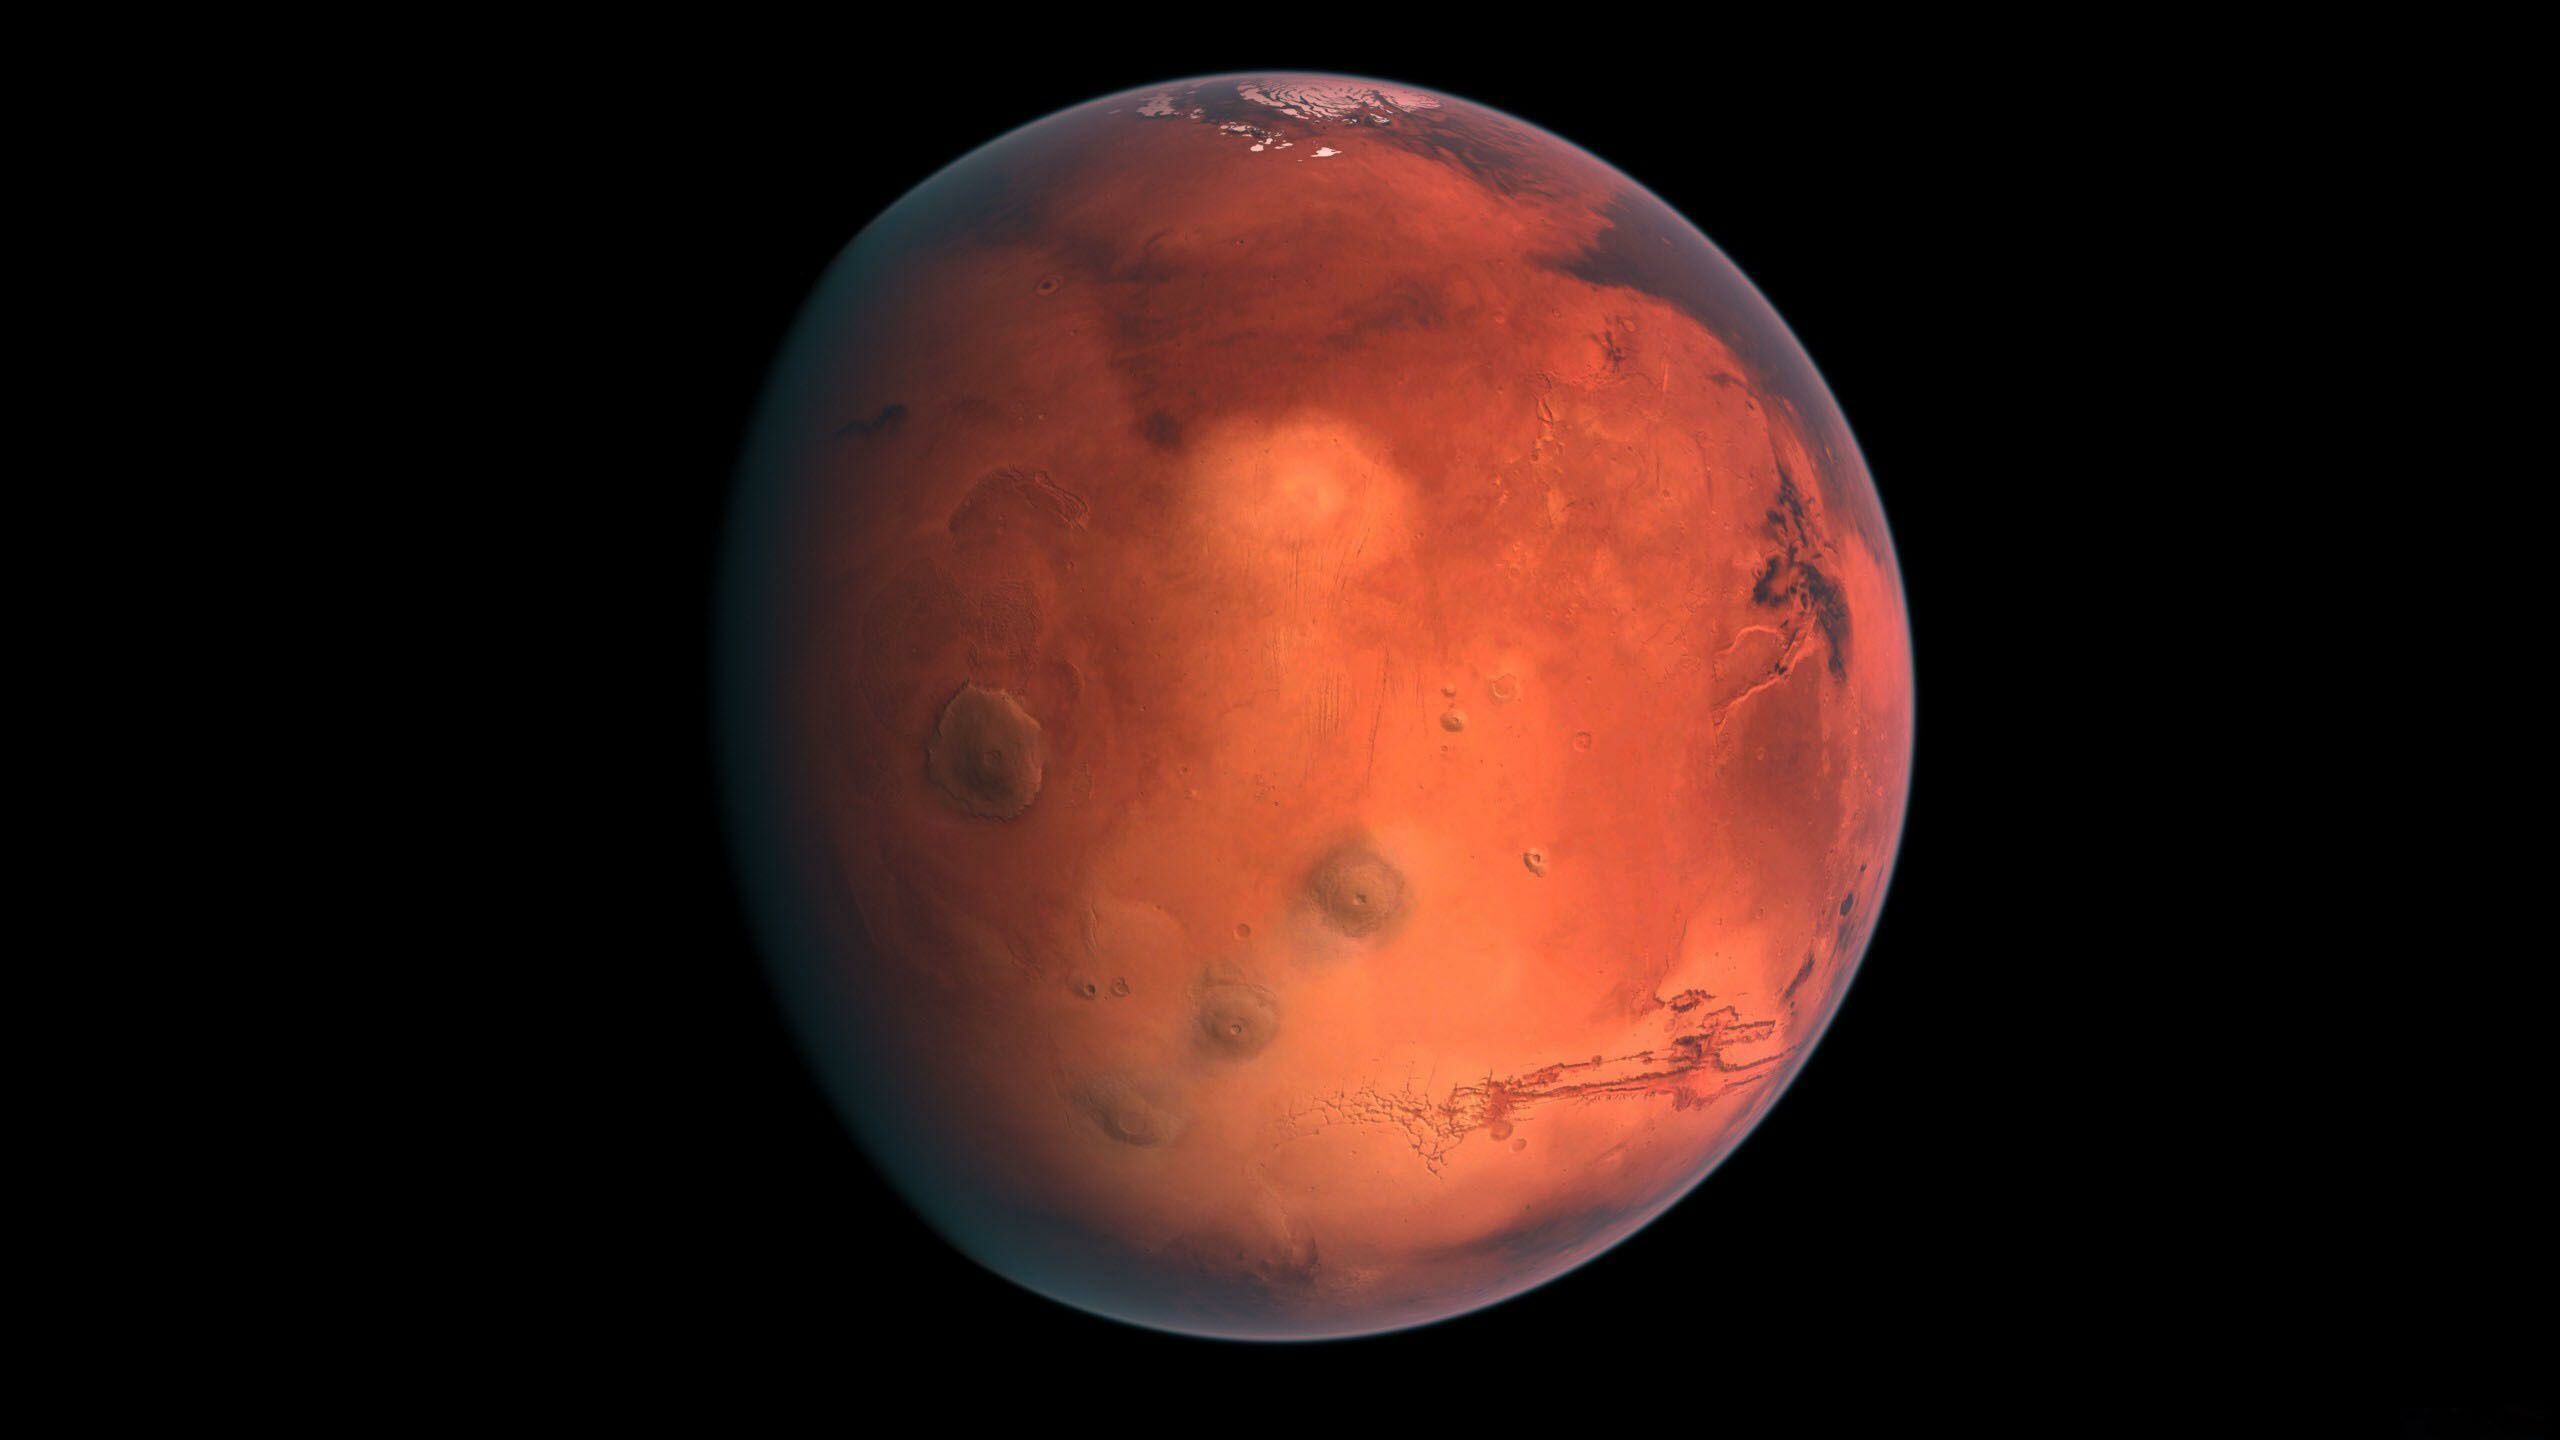 Mars: The planet has the largest dust storms in the solar system. 2560x1440 HD Wallpaper.